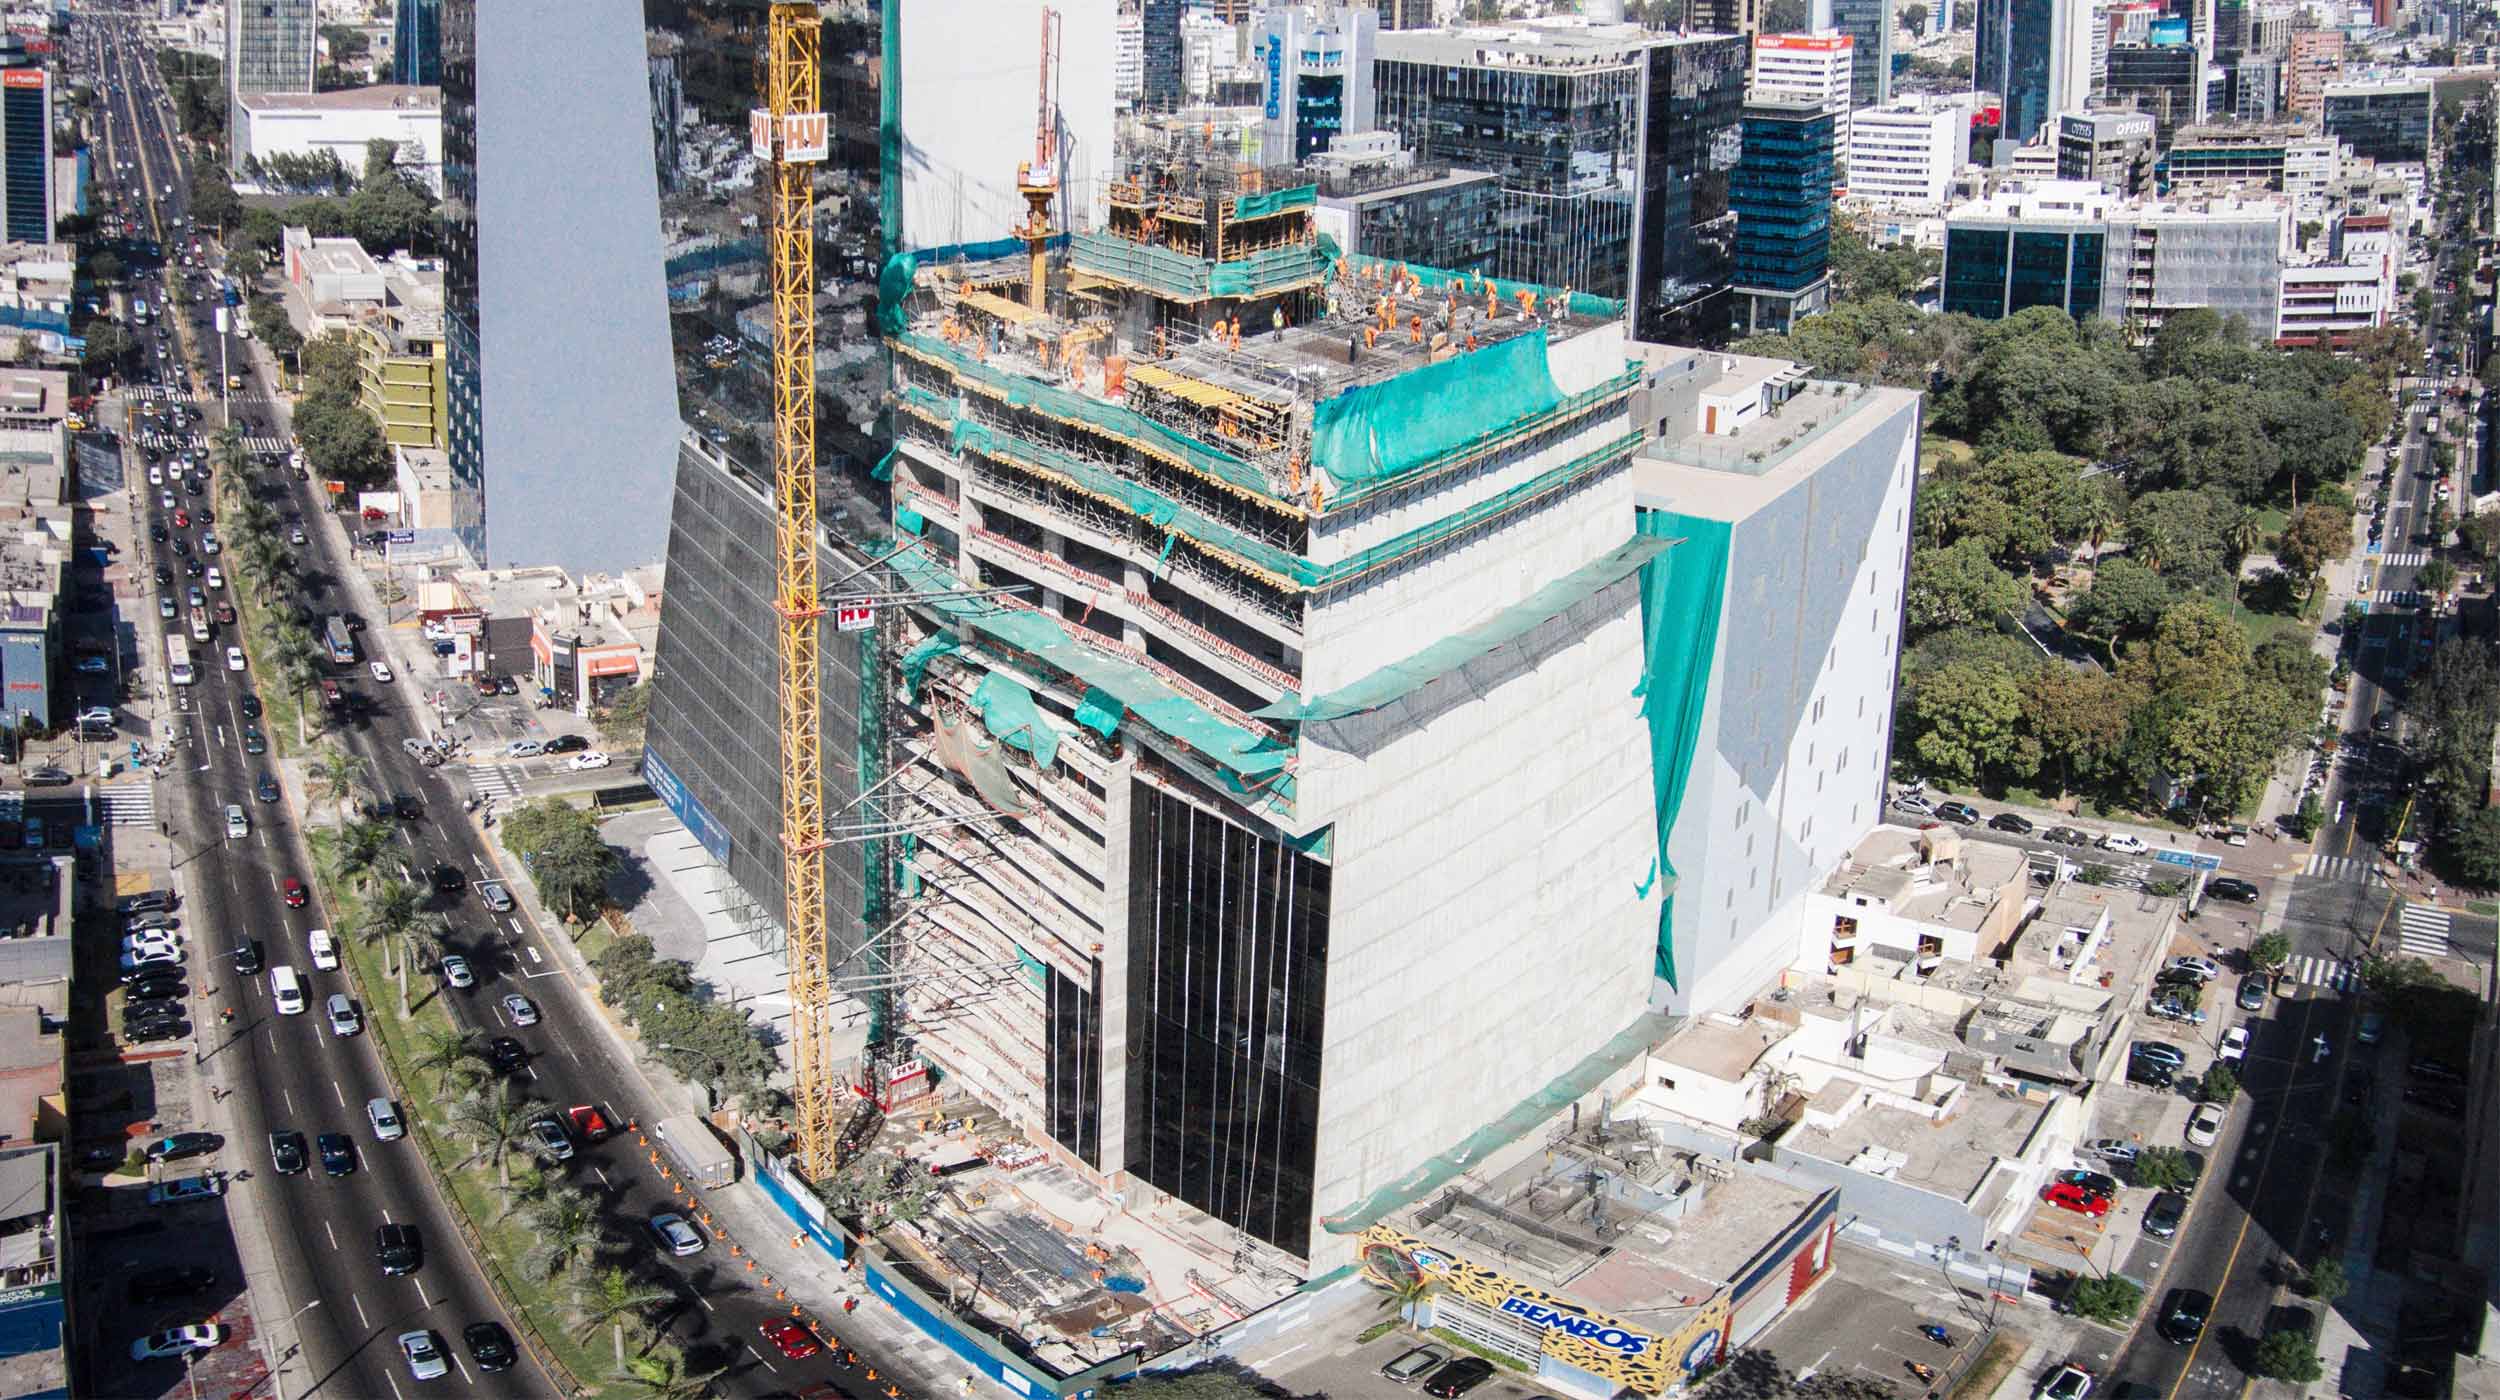 This commercial tower measures more than 90 m in height, making it one of the tallest buildings in Lima.